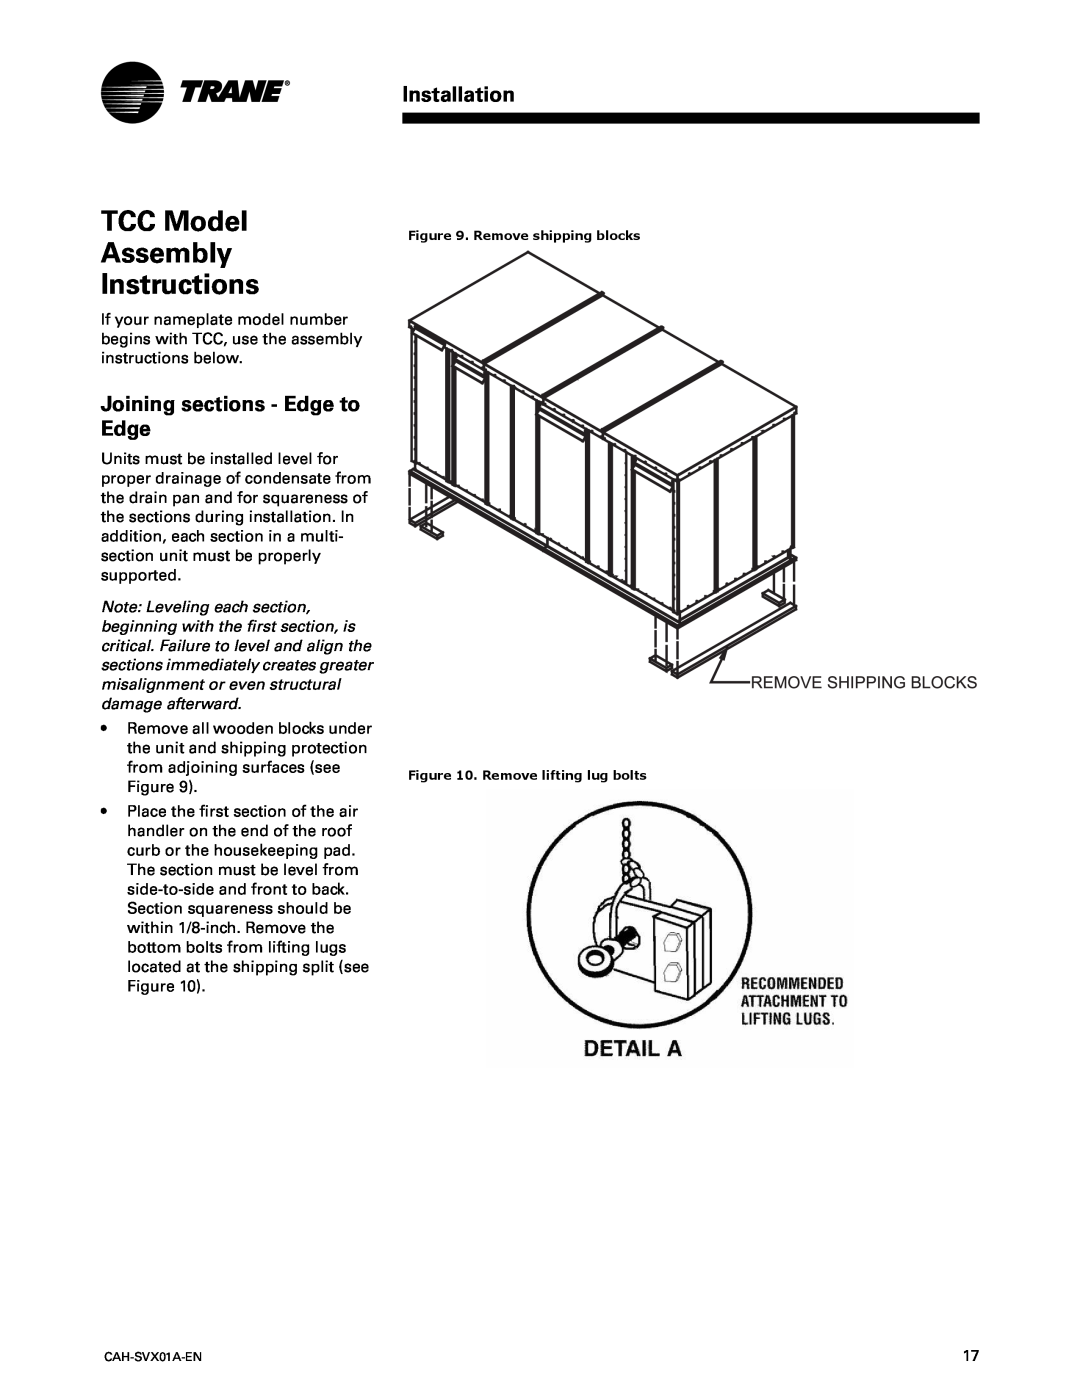 Trane Custom Climate Changer Air Handlers TCC Model Assembly Instructions, Joining sections - Edge to Edge, Installation 